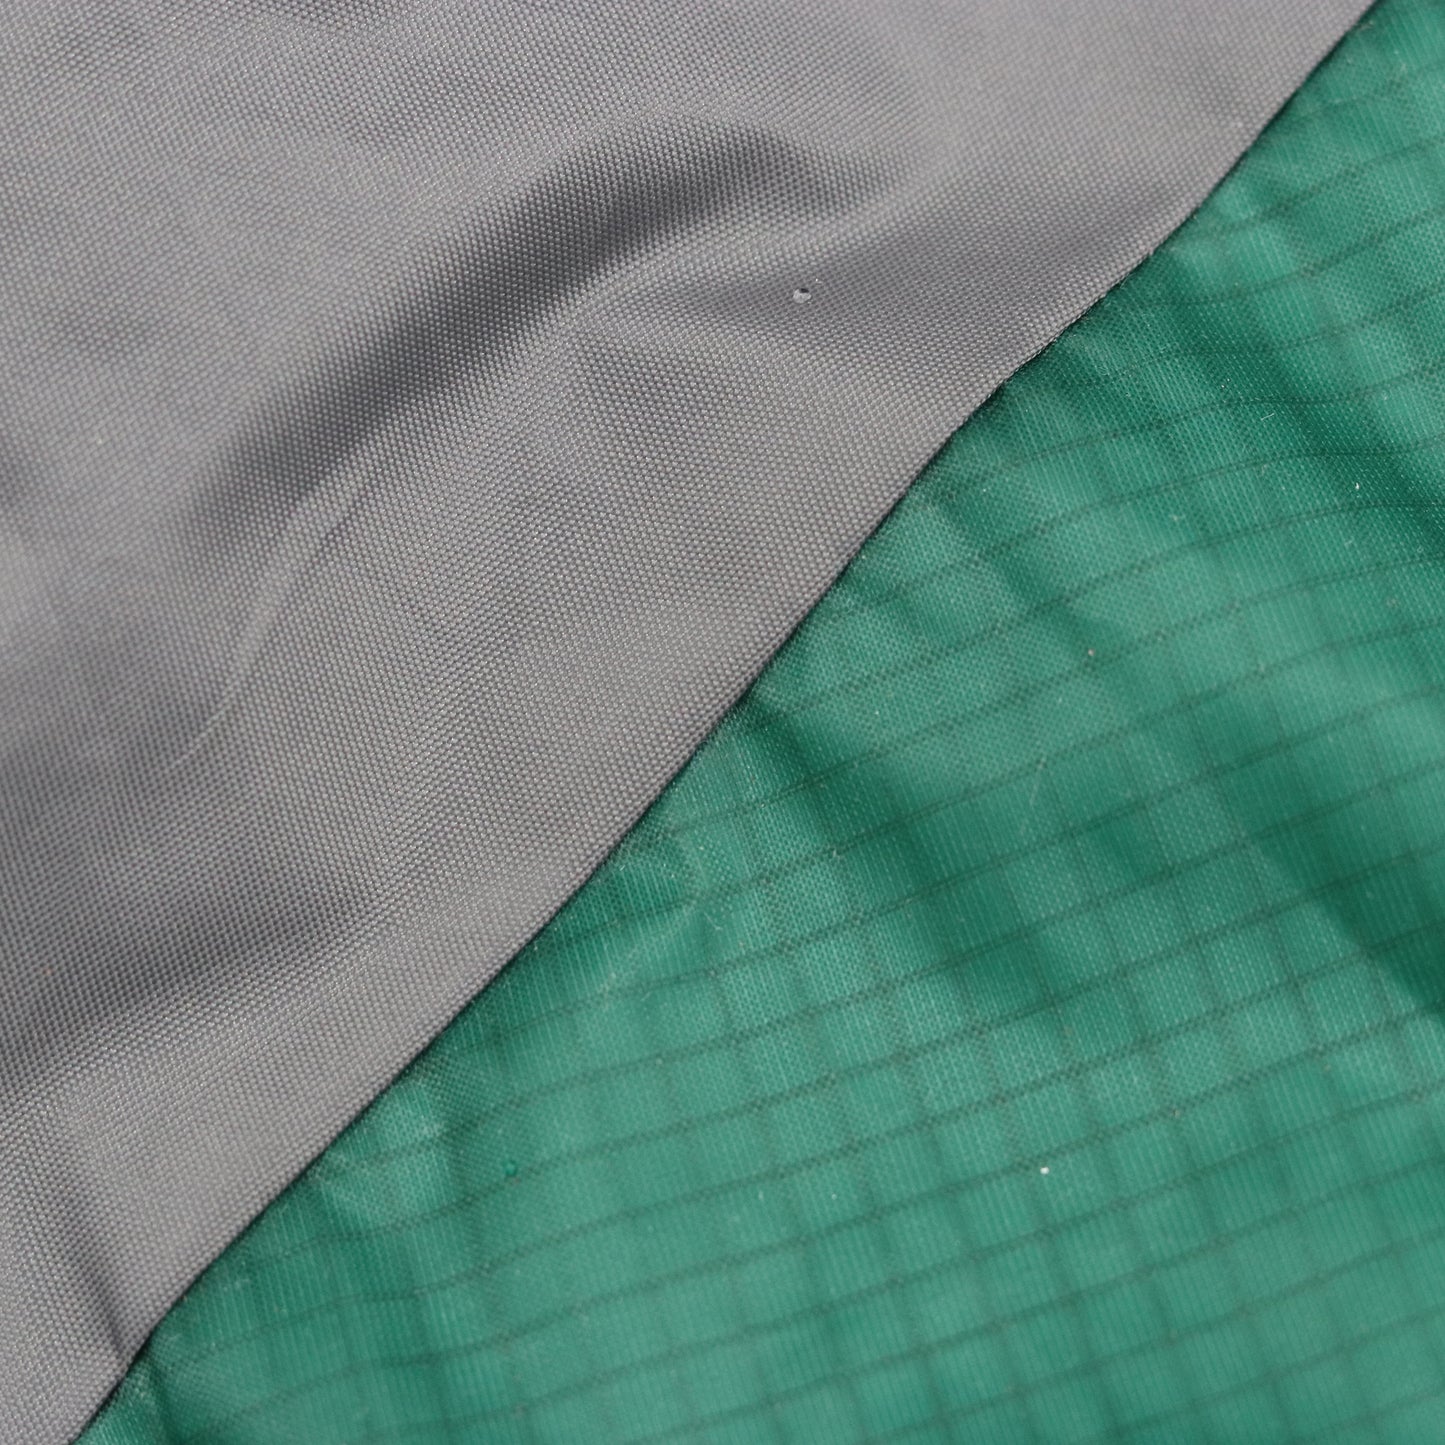 Upcycling Raincoat-Belly Part "Green & Grey"